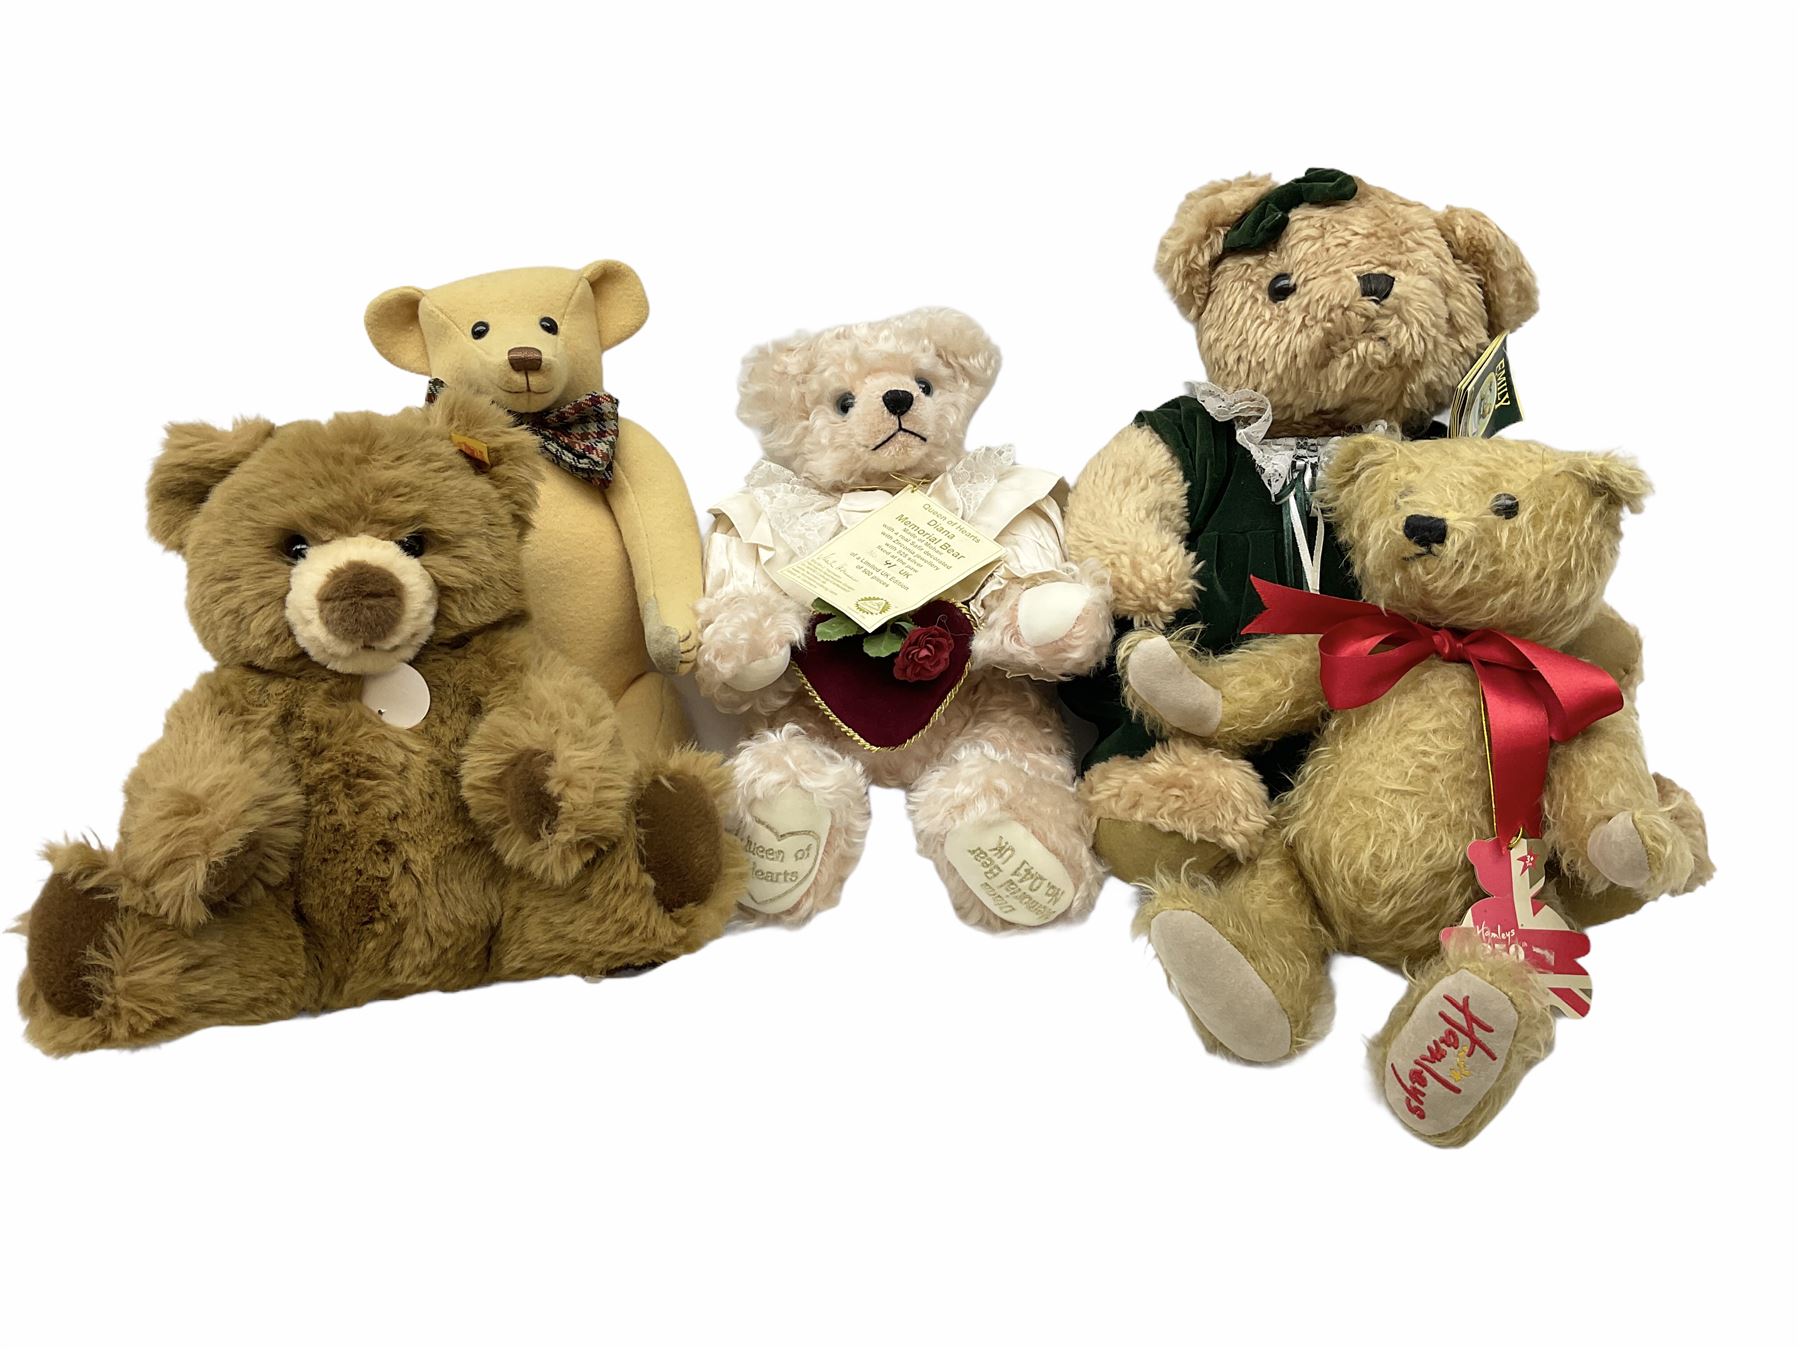 Five modern collector's teddy bears - Steiff 2001 bear No.660177 with tags; Hermann limited edition